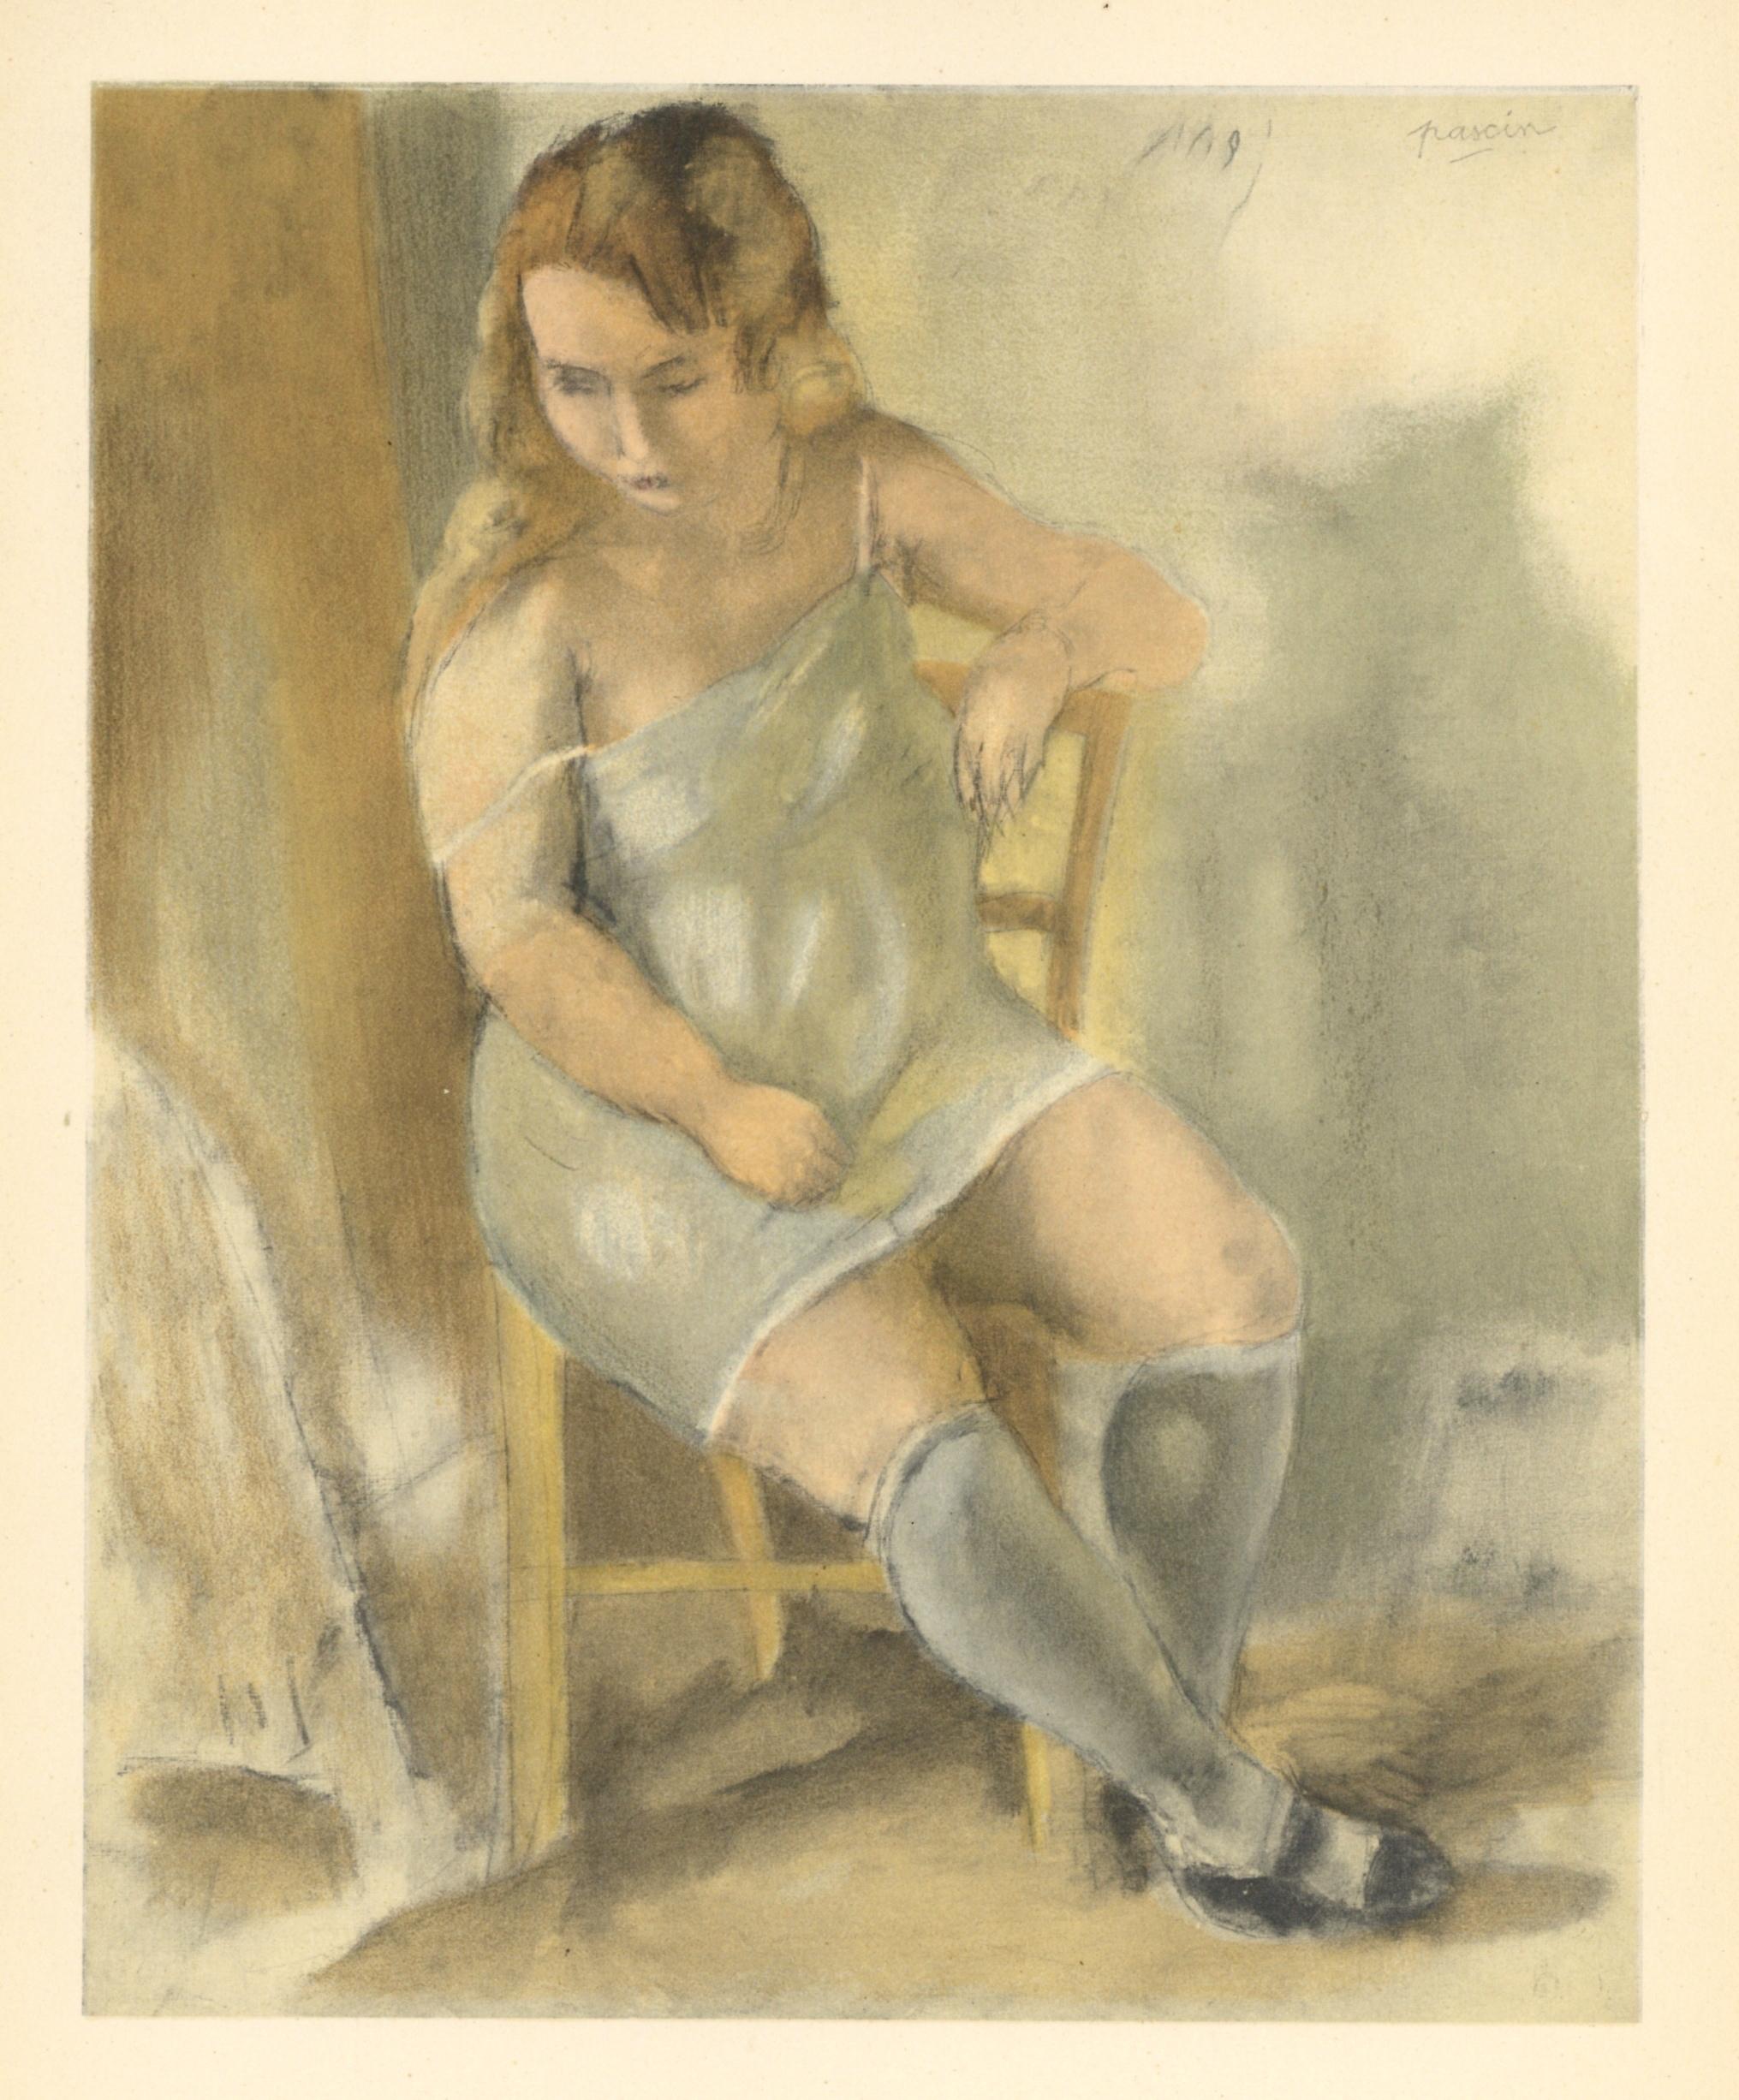 Medium: lithograph (after the painting). Printed in Paris in 1954 at the atelier of Mourlot Frères in an edition of 2000. Sheet size: 12 1/4 x 9 1/2 inches (315 x 245 mm). Signed in the plate (not hand-signed). 